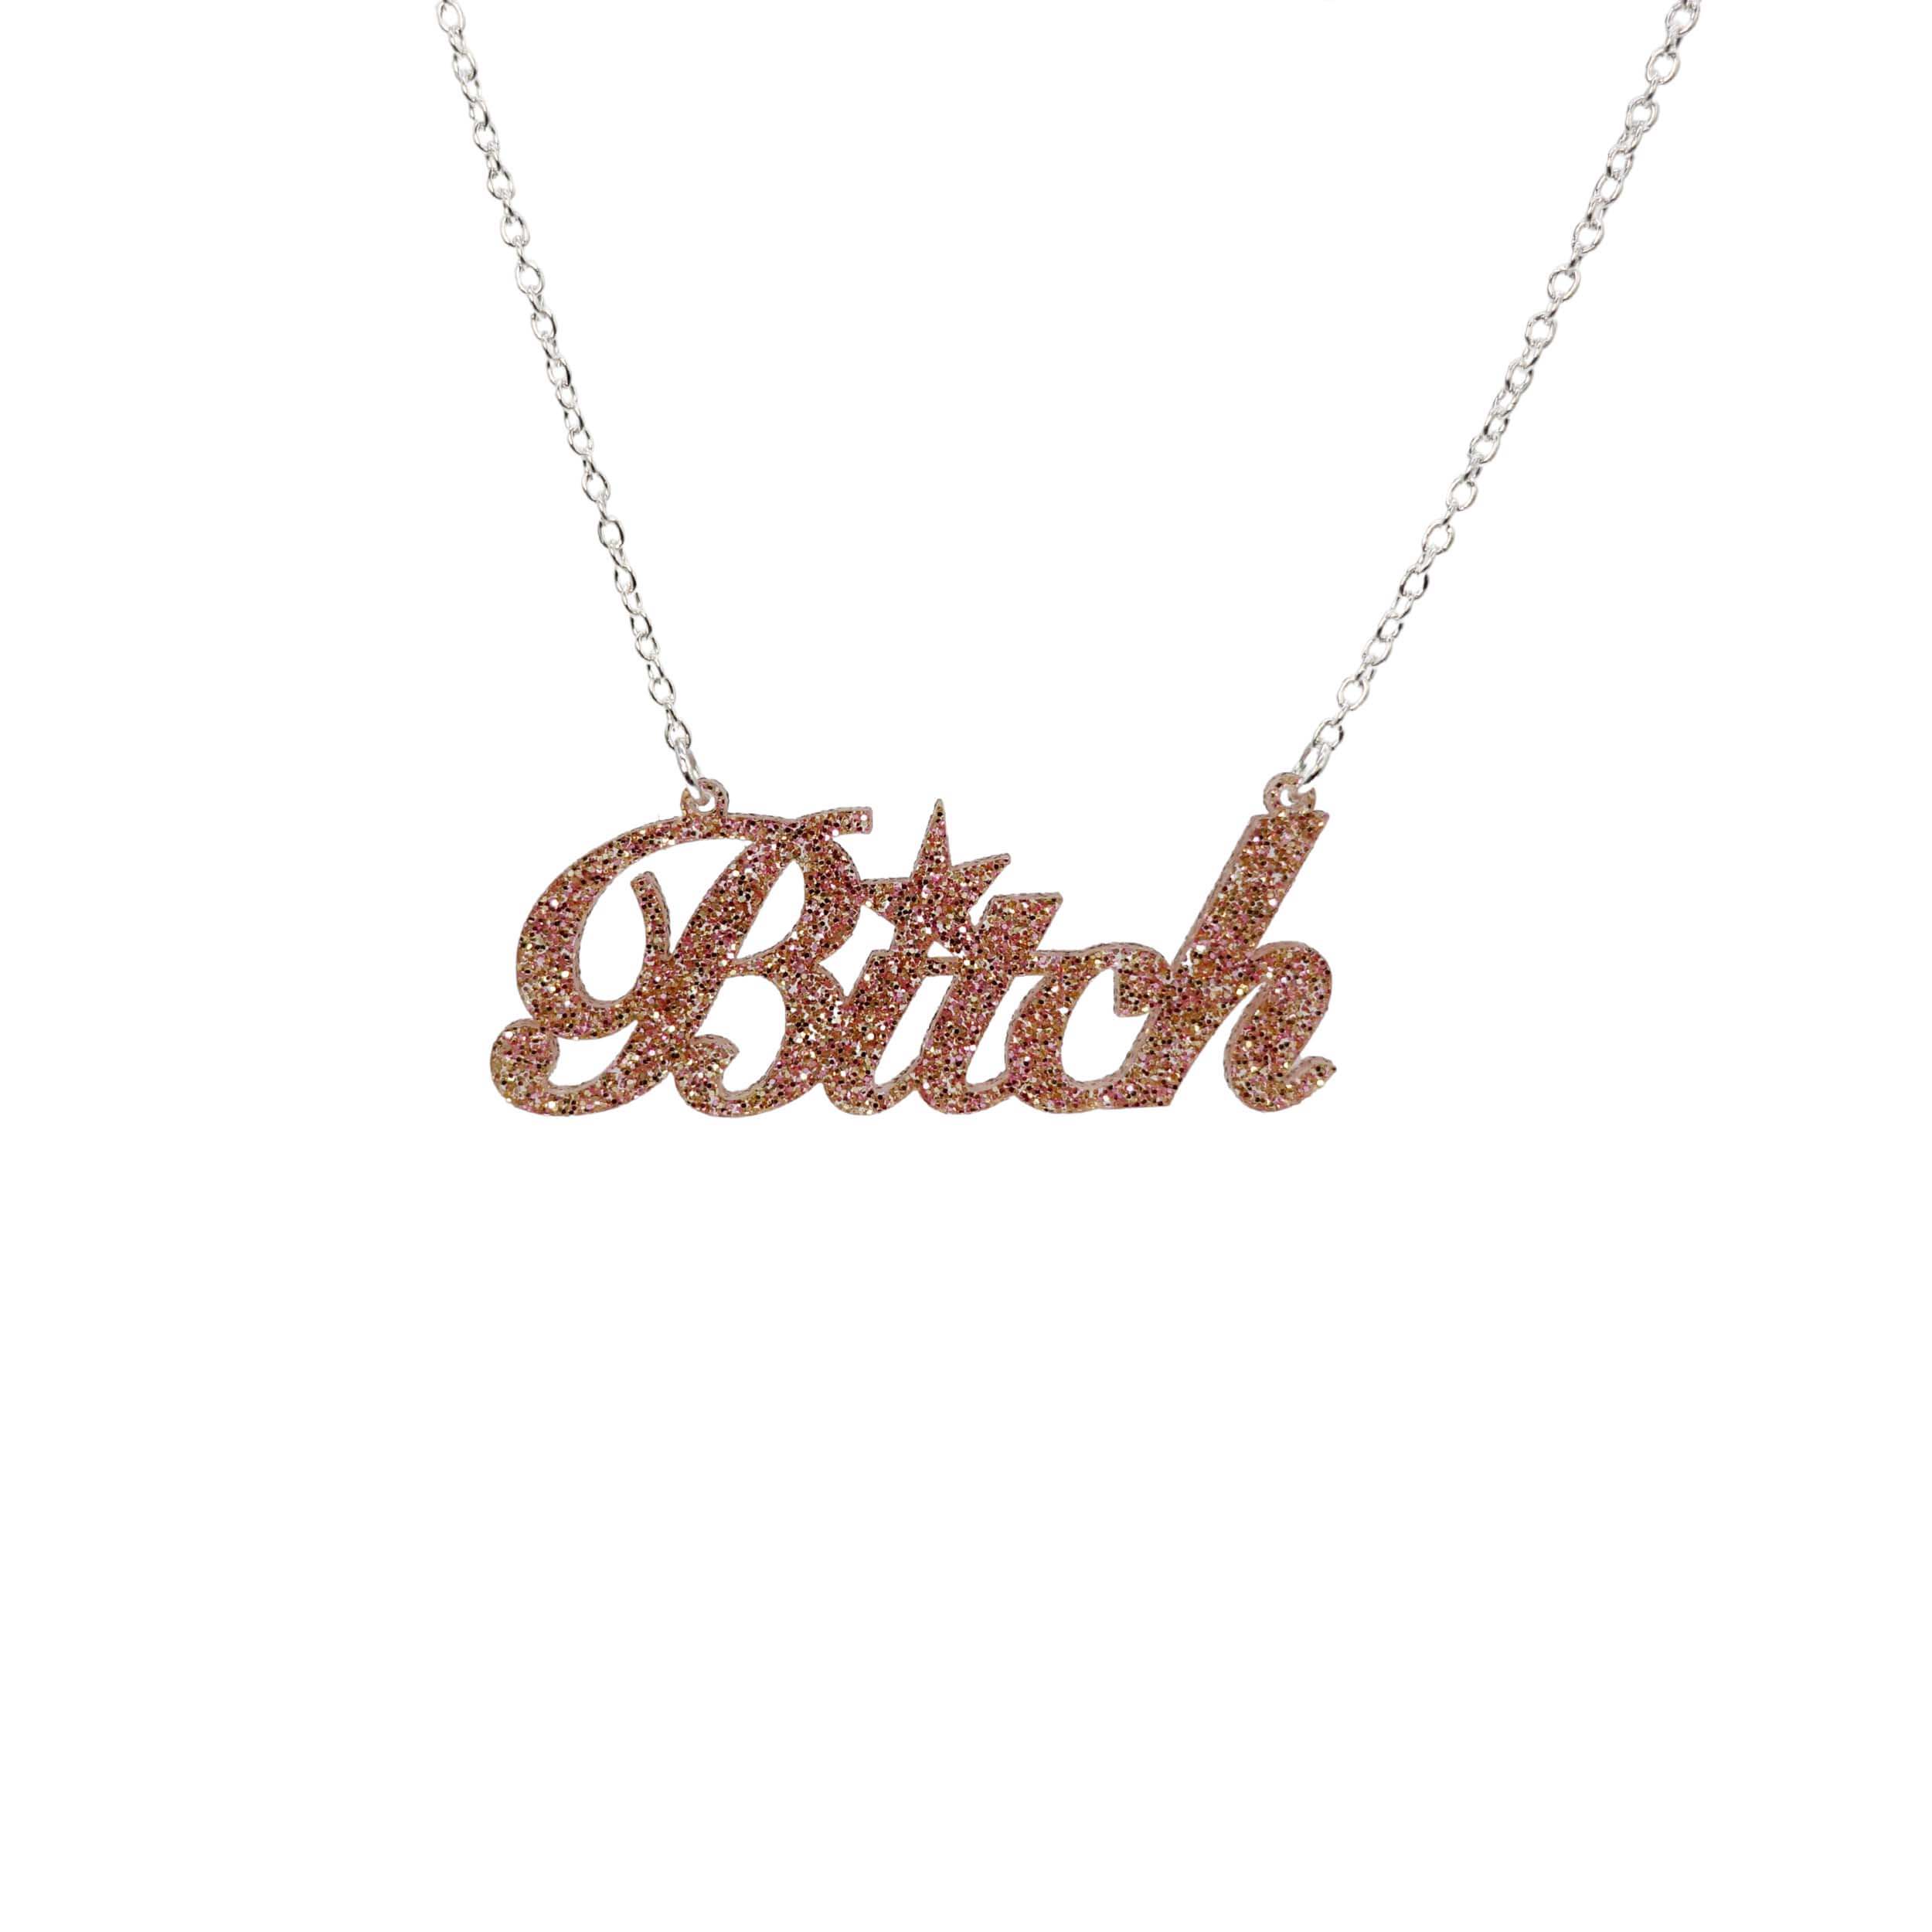 B*tch necklace in pink fizz glitter shown hanging against a white background. 